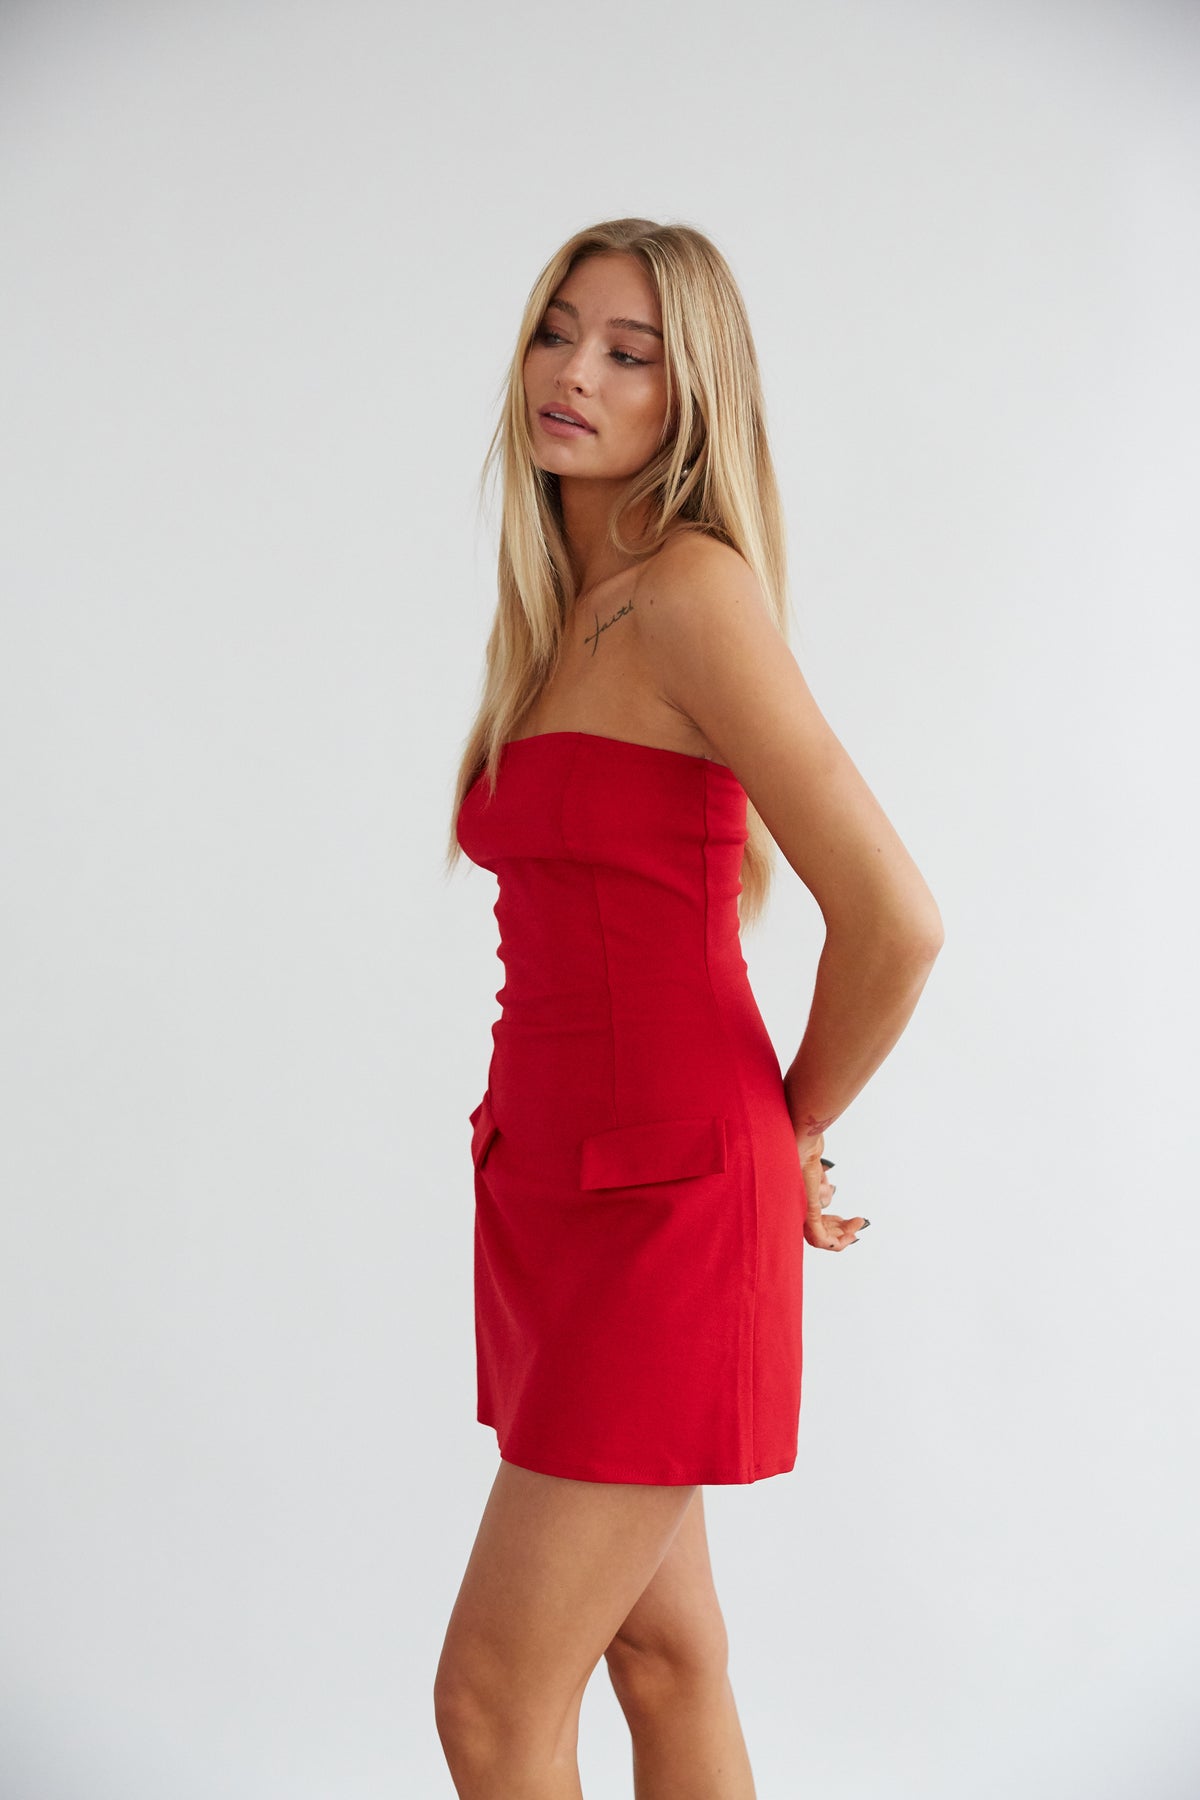 red bodycon dress - comfy and casual mini dress - strapless red dress - concert outfit inspo - party dresses - cupid halloween costume - girly mini dress